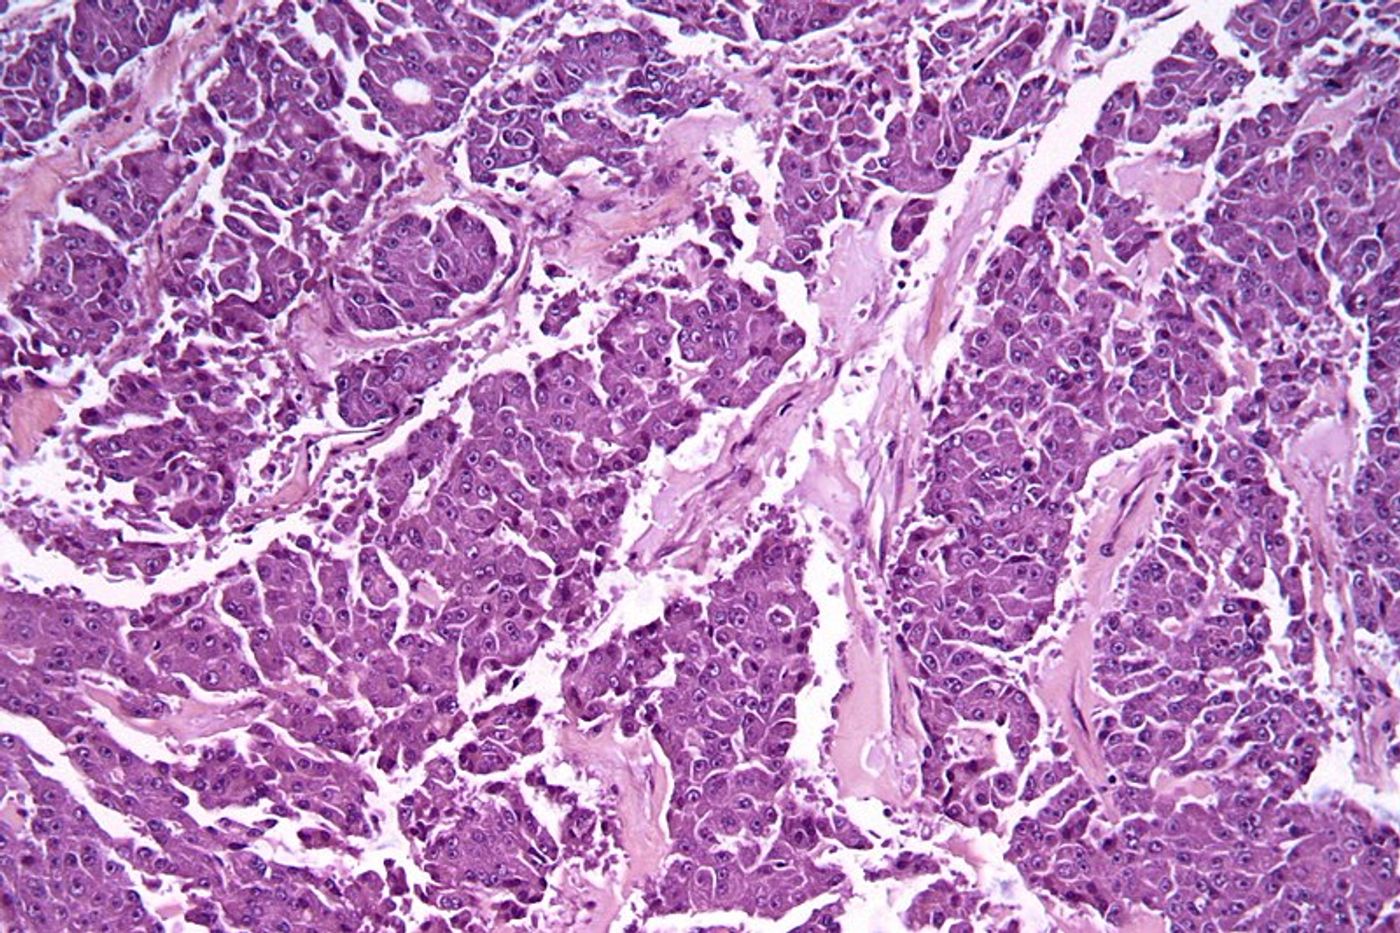 High magnification micrograph of a acinar cell carcinoma of the pancreas. Credit: Wikimedia user Nephron